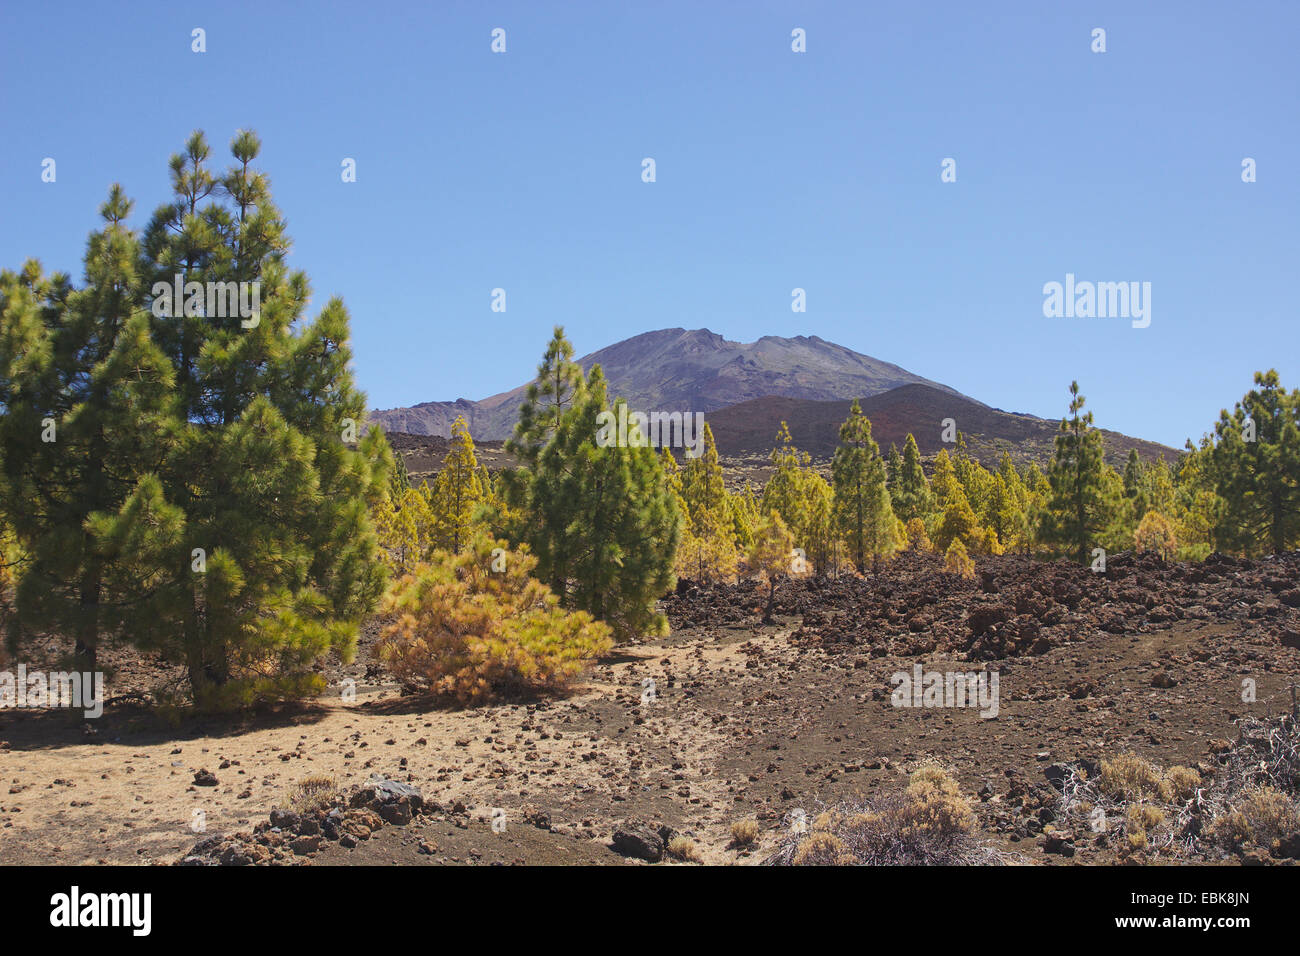 Canary pine (Pinus canariensis), pine forest at Pico Viejo, Canary Islands, Tenerife, Teide National Park Stock Photo